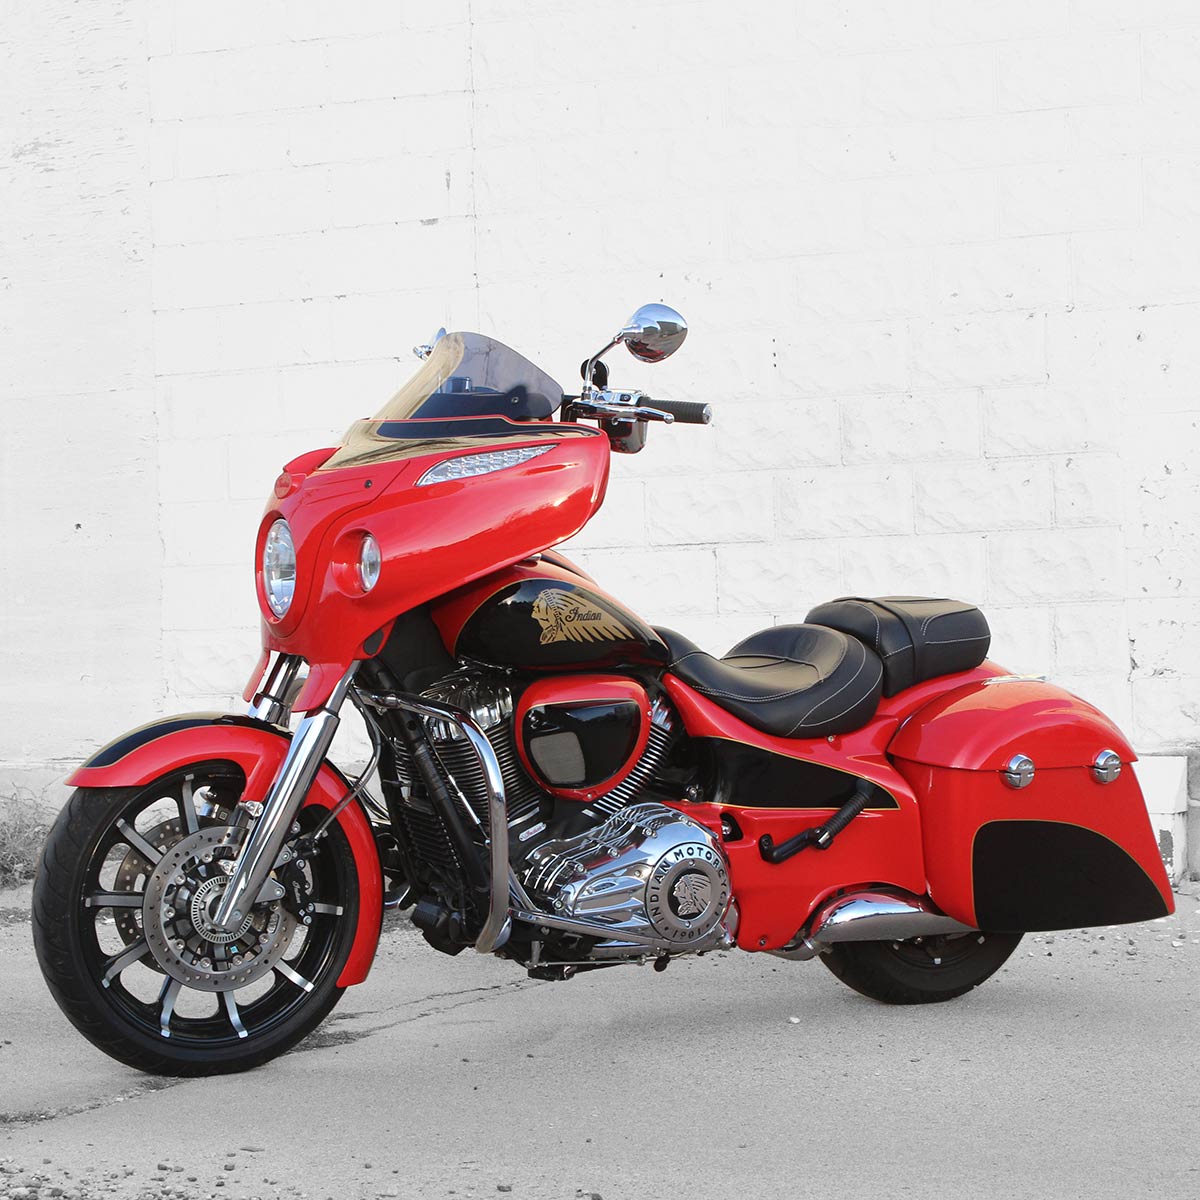 Reytelo Bag Extensions For Indian® 2014-2020 Chieftain Classic and Roadmaster Motorcycles